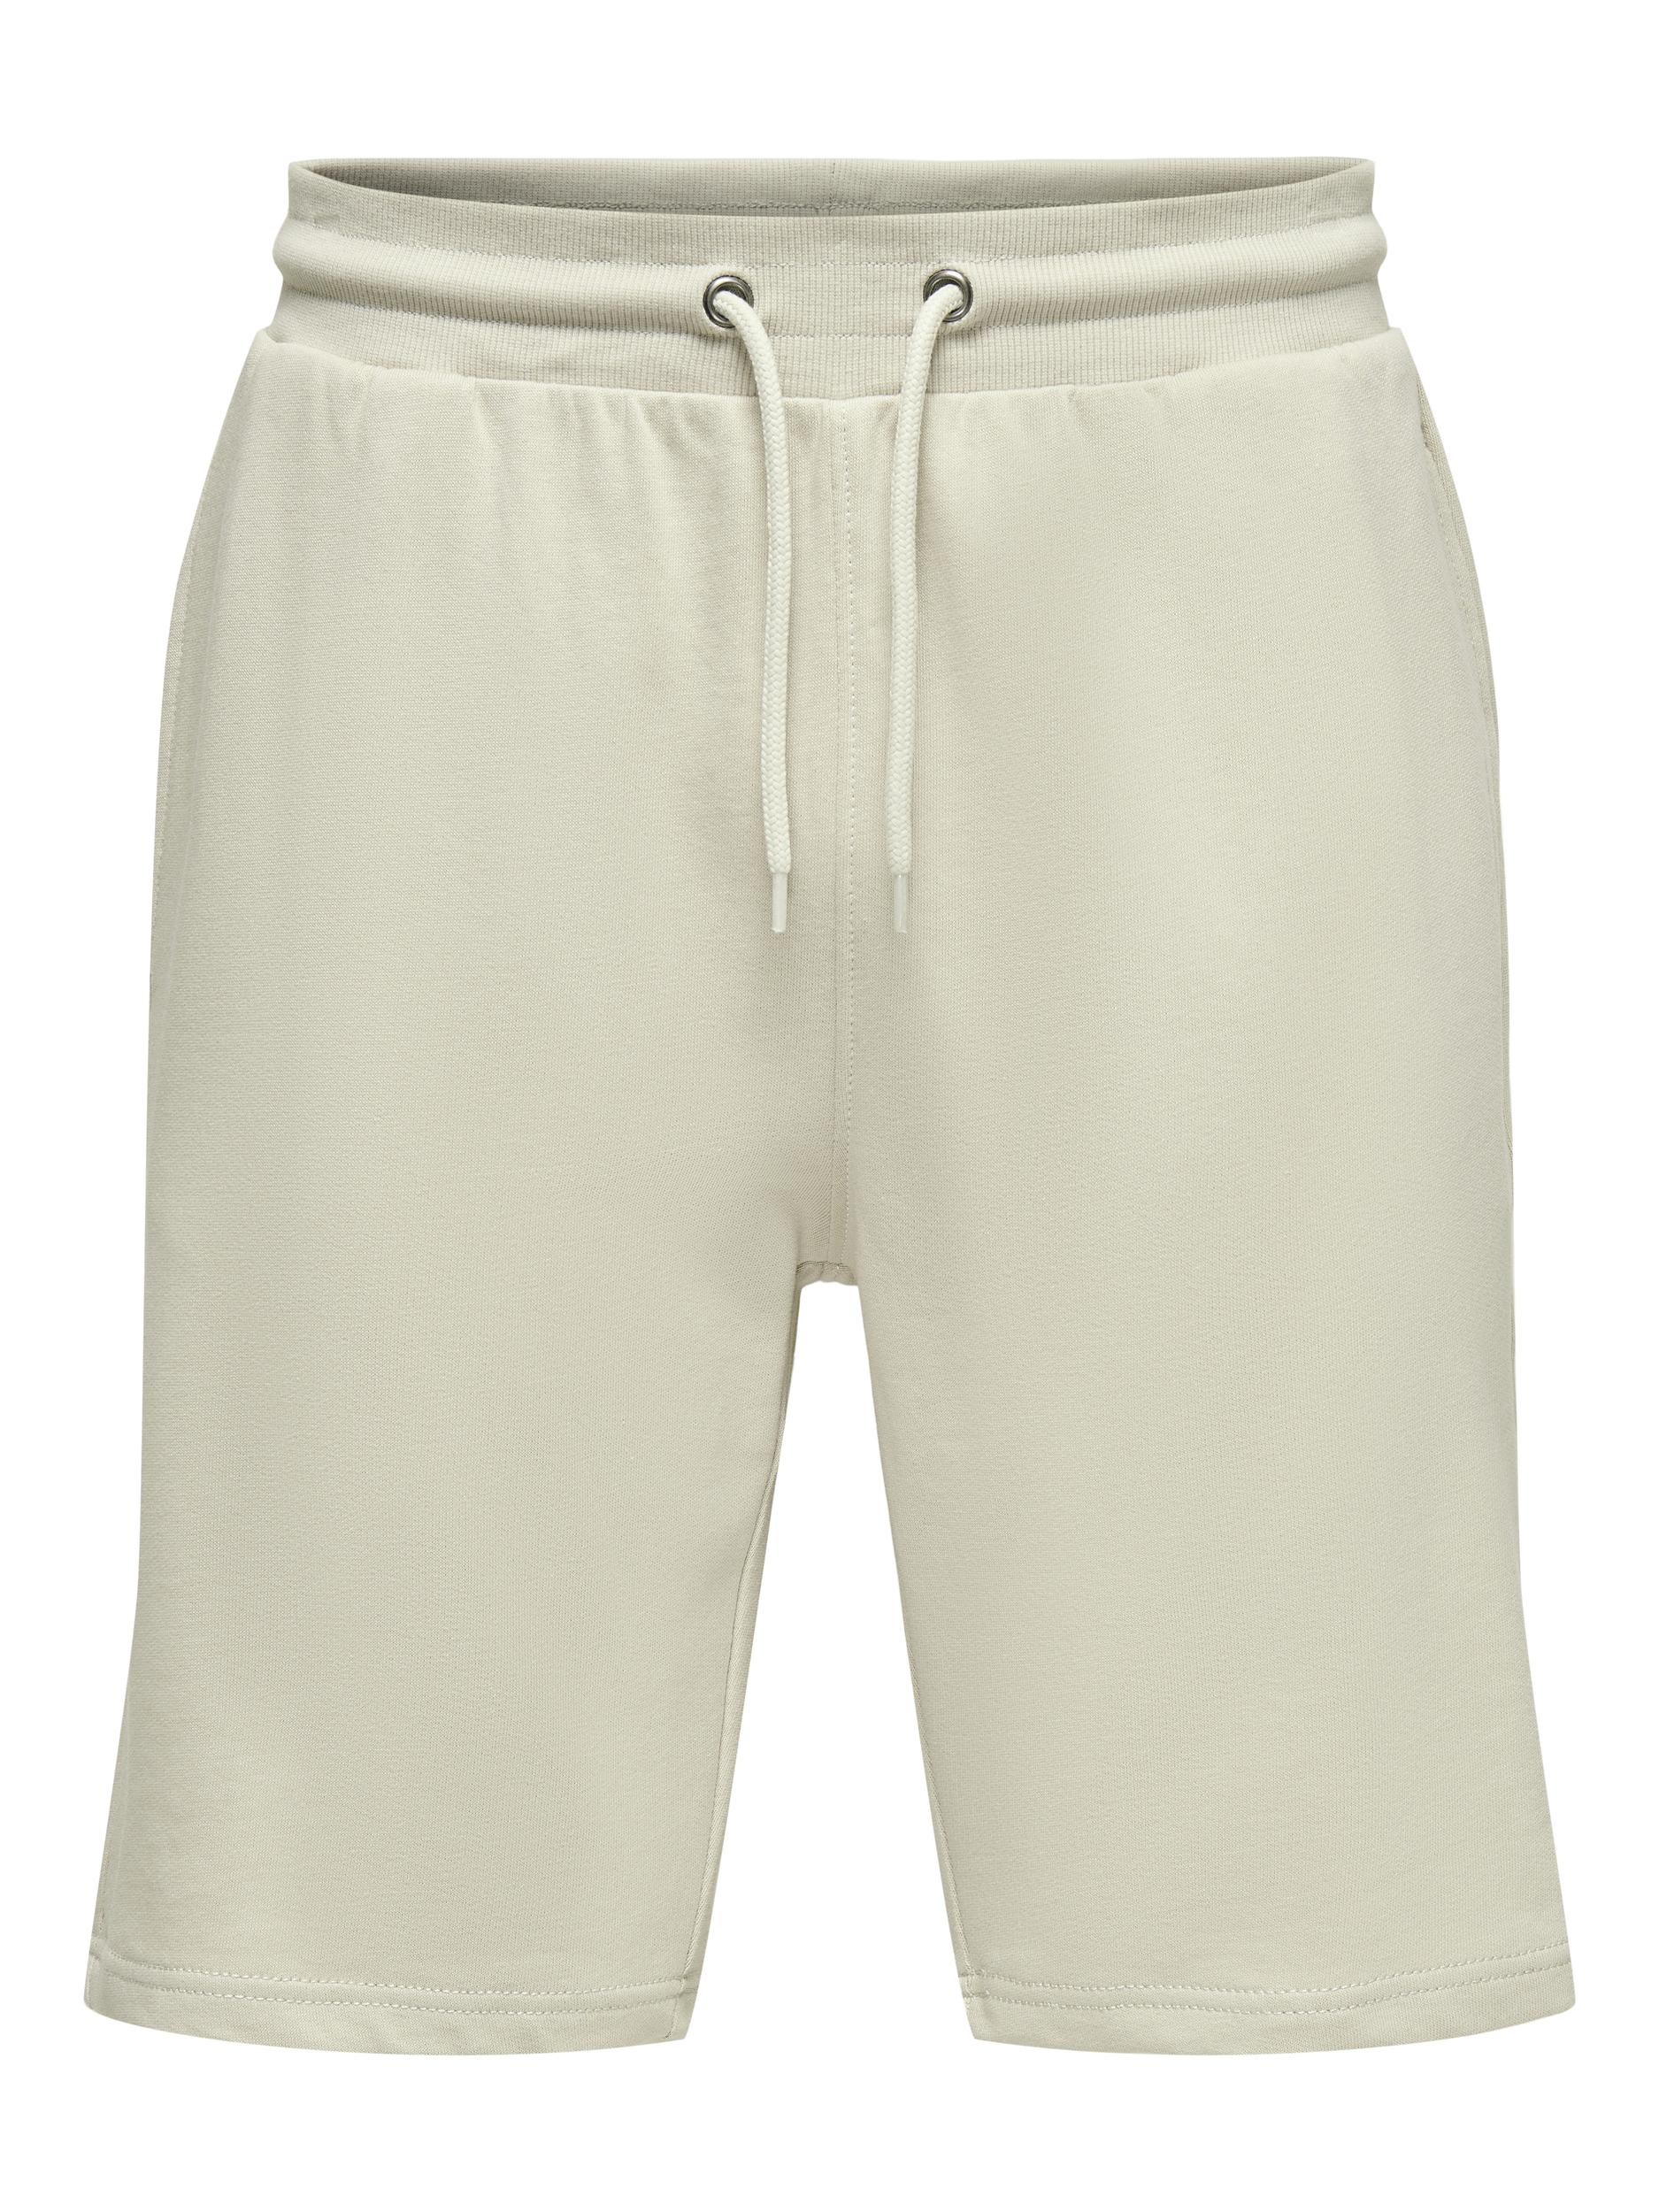 ONLY & SONS Sweatshorts »ONSNEIL SWEAT SHORTS« von Only & Sons